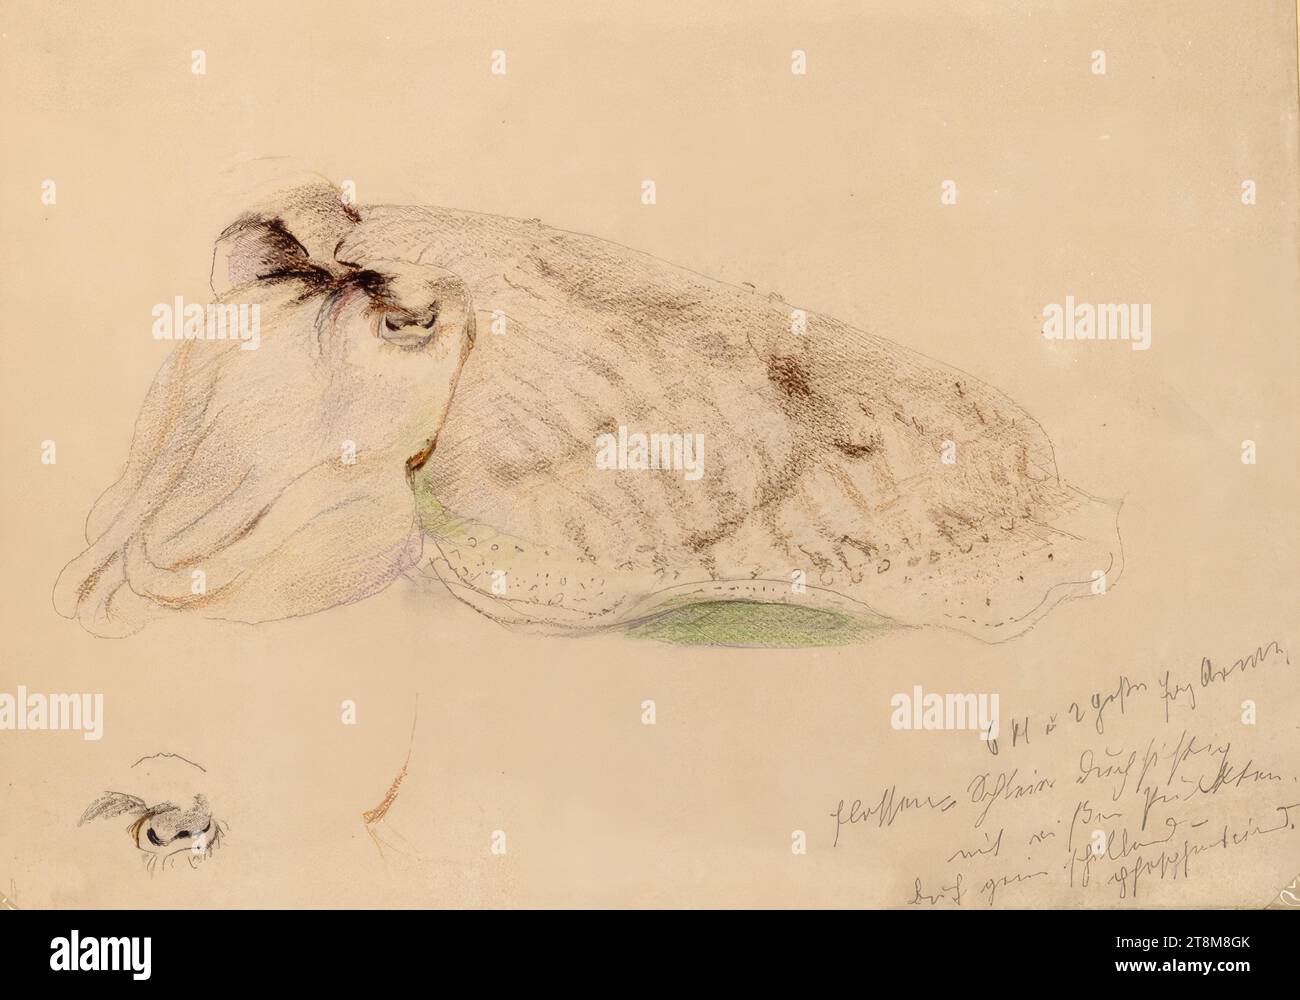 Squid, Marie Lippert-Hoerner (Vienna 1860 - 1932 Vienna), drawing, preliminary pencil drawing, crayon, 21.8 x 30.2 cm (8 9/16 x 11 7/8 in.), r.l. detail caption Stock Photo